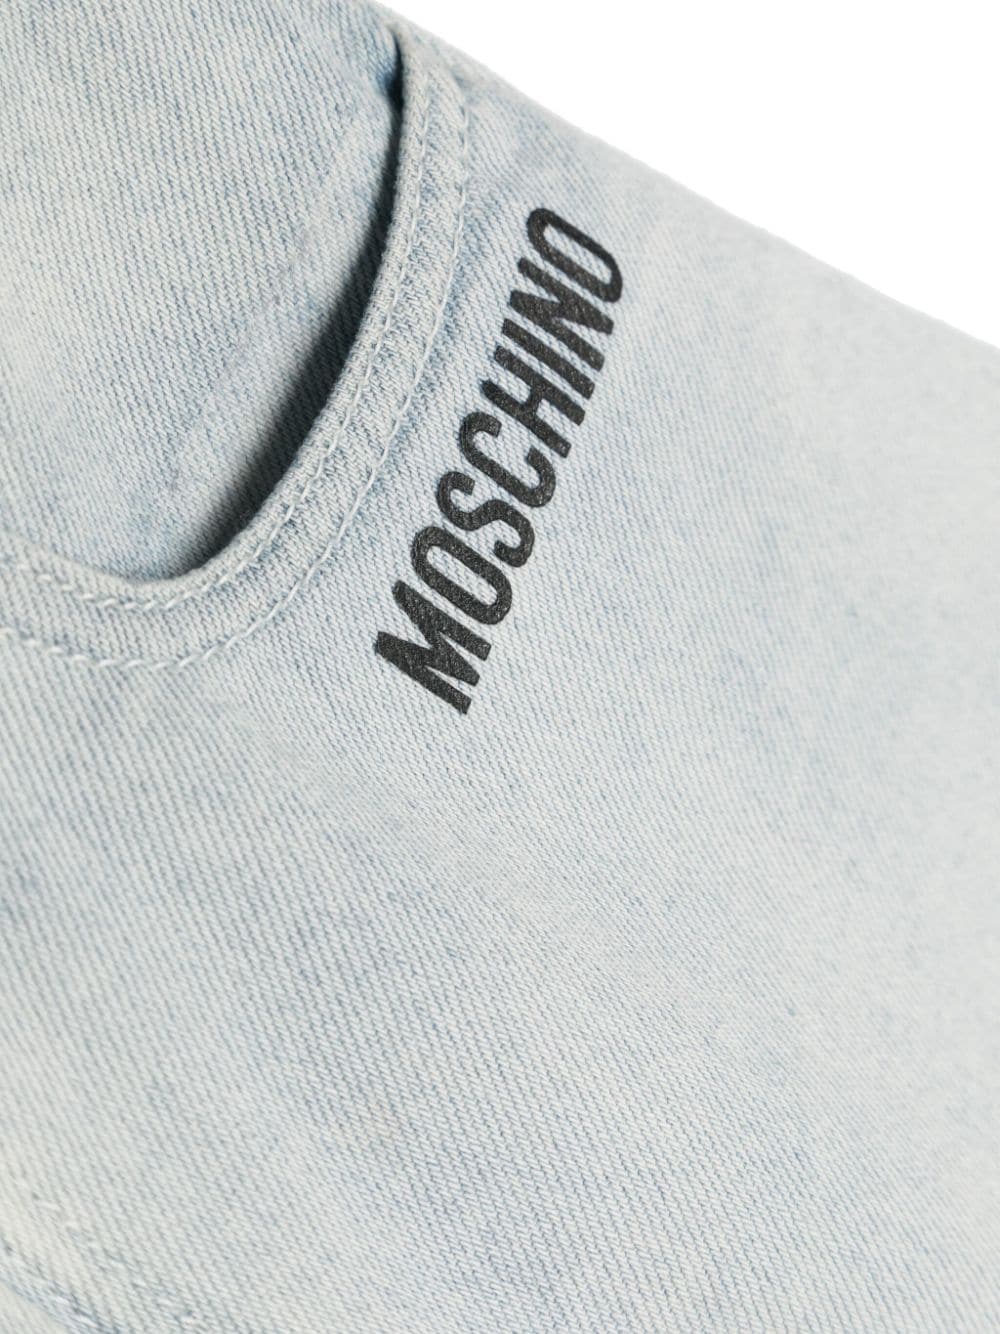 Moschino Kids shorts in jeans